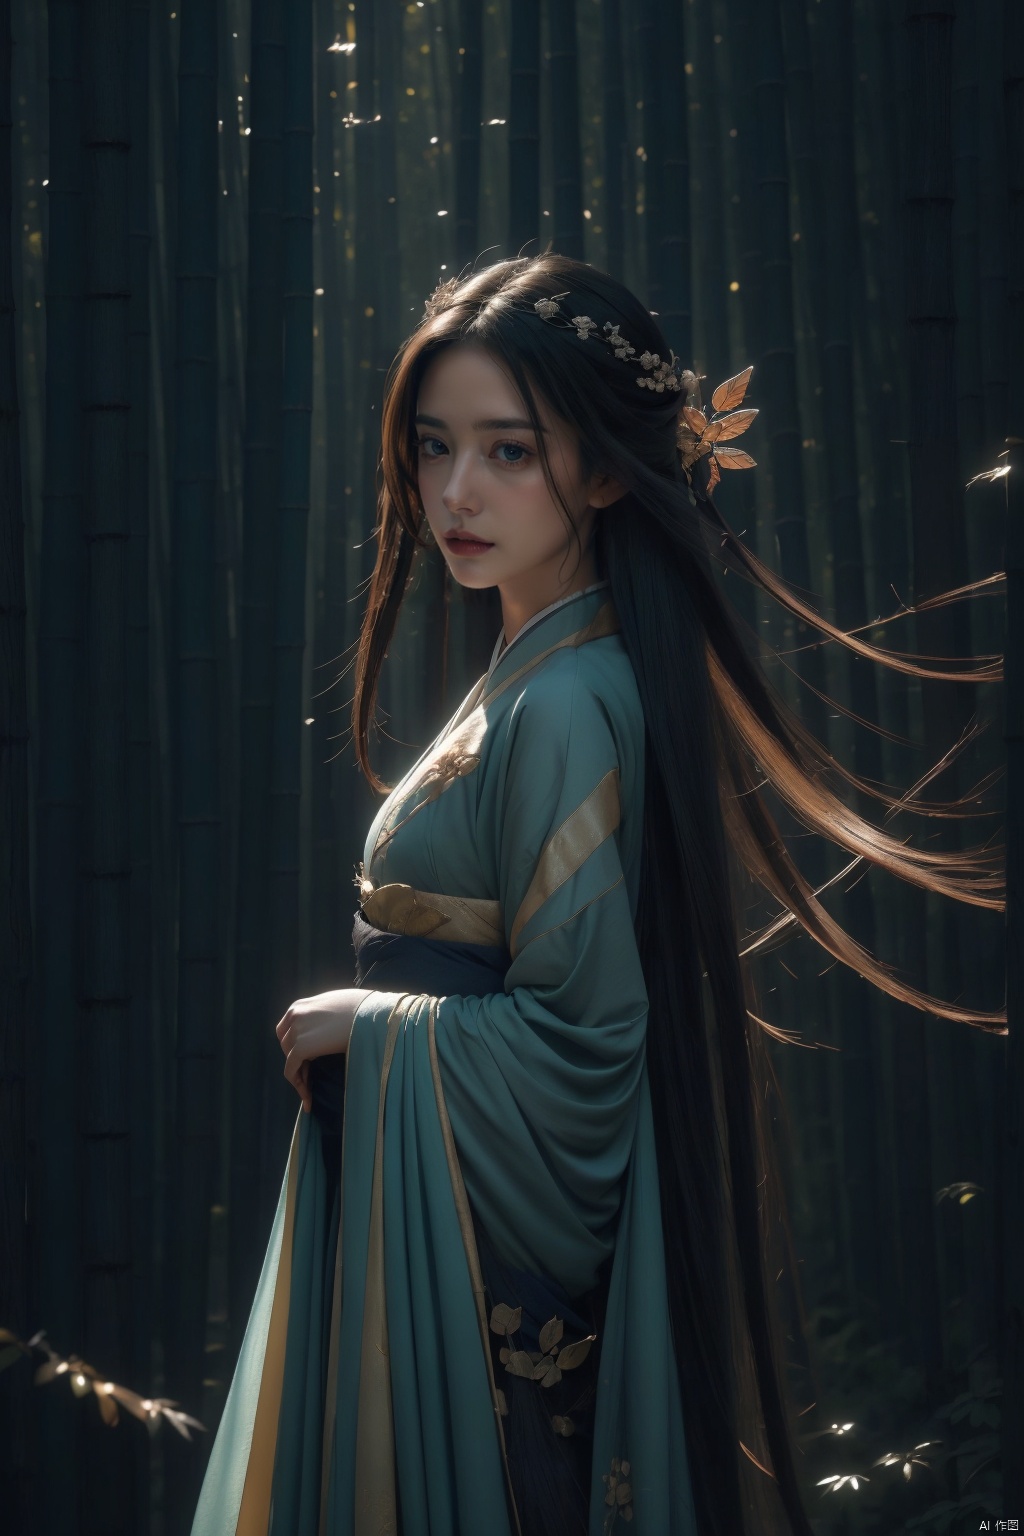 1girl, hanfu,masterpiece, best quality, super wide angle, best fingers, facing viewer, full frontal, magnificent, celestial, ethereal, painterly, epic, majestic, magical, fantasy art, cover art, dreamy, elegant, cinematic, background illuminated, rich deep colors, ambient dramatic atmosphere, creative, perfect, beautiful composition, intricate, detailed
 light and shadow interweaving, atmosphere creation, detail processing, visual appeal,